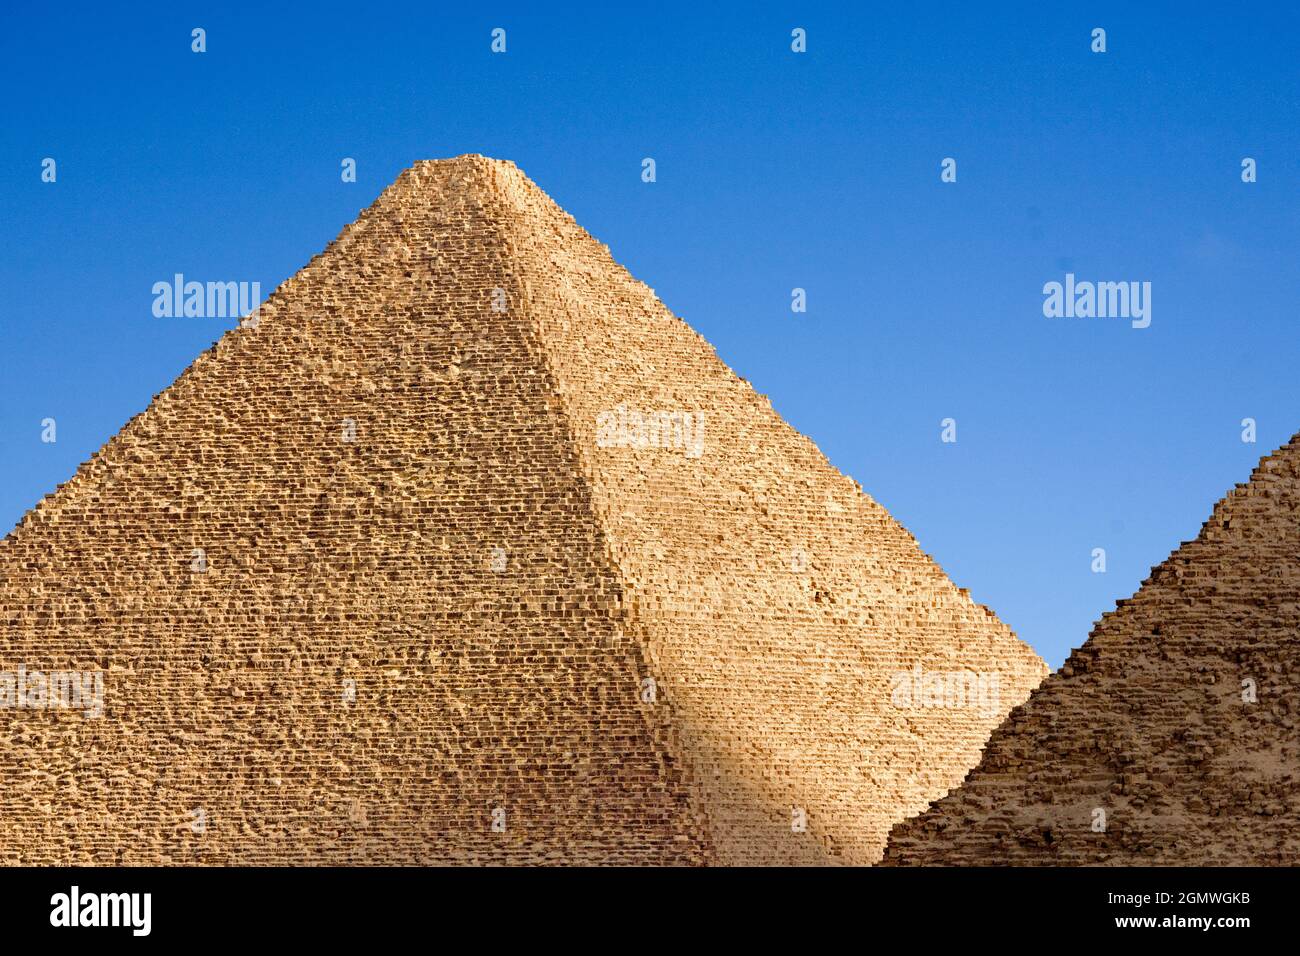 Gixa, Cairo, Egypt, 7 December 2010    The great Pyramids of Giza, Egypt are an iconic, ancient place of wonder and mystery. And some of the most trul Stock Photo